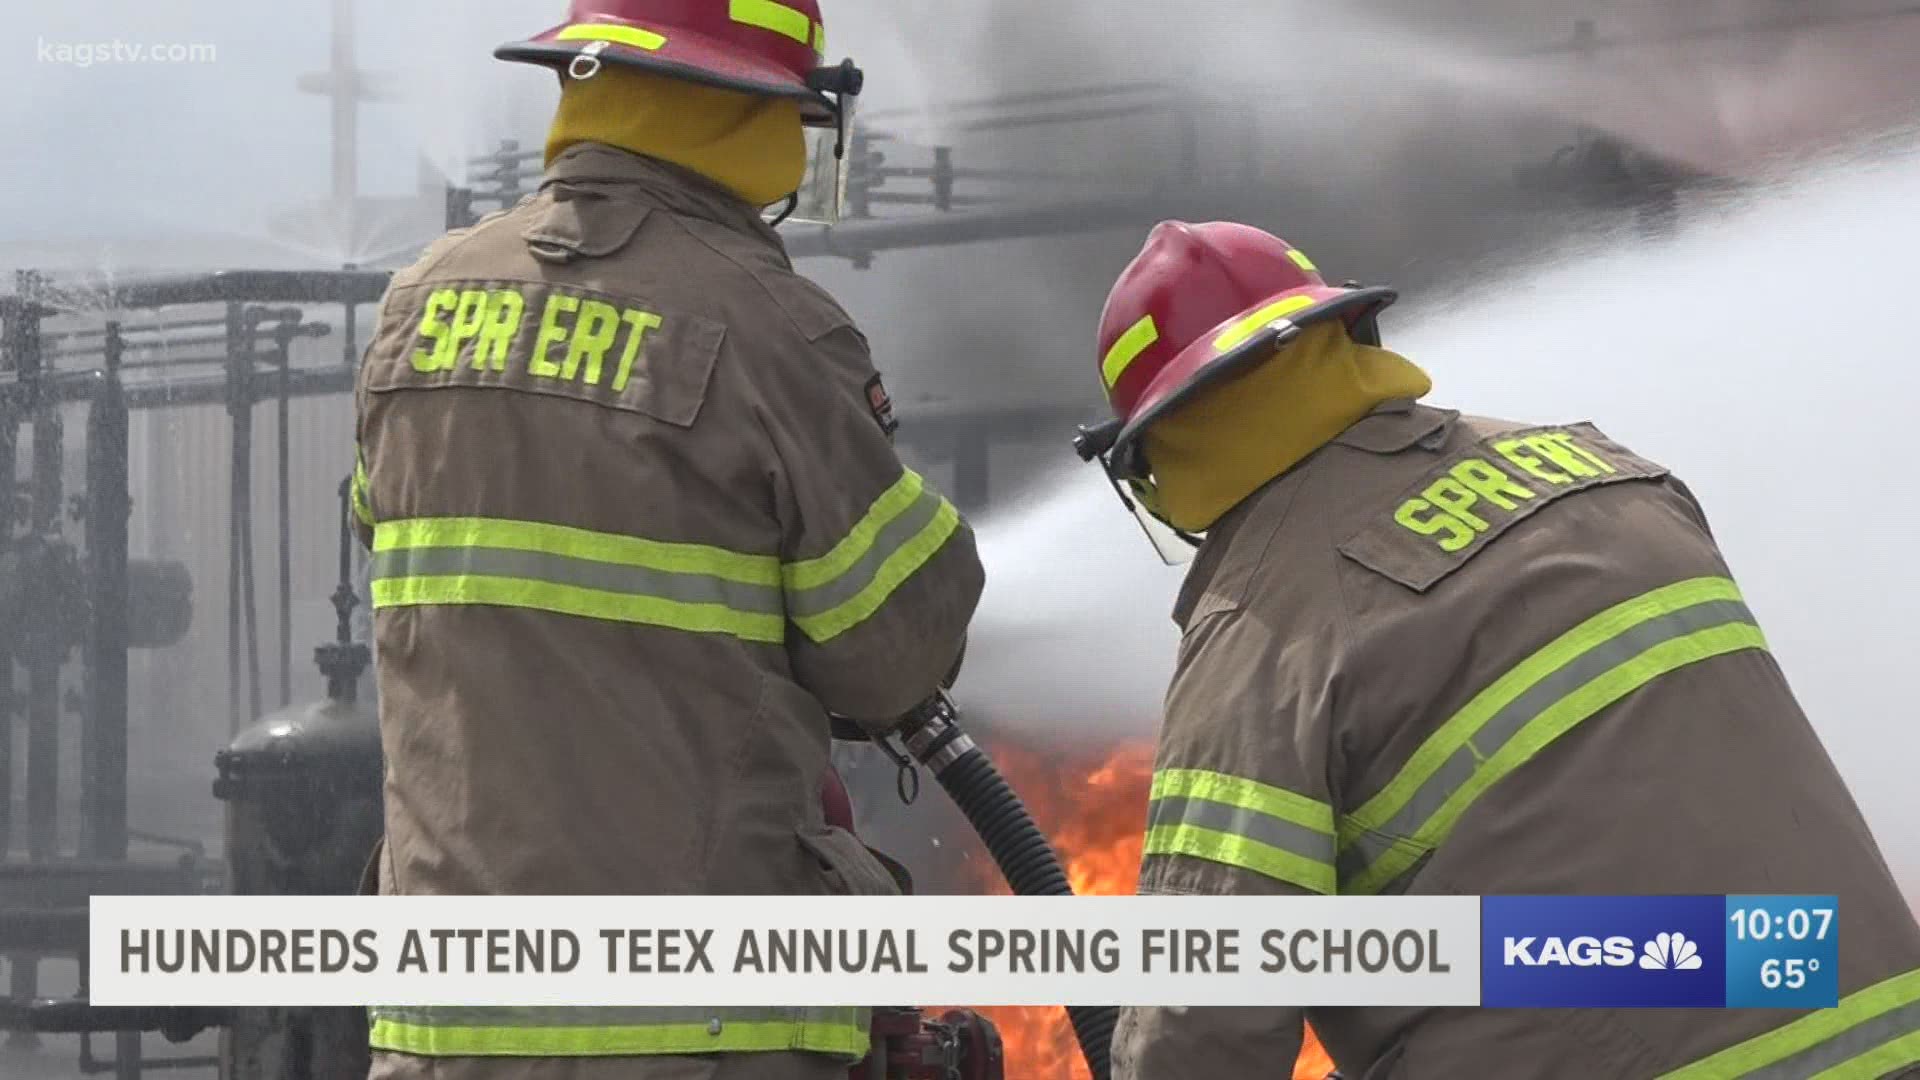 TEEX cancelled the rest of 2020's Fire Schools because of safety concerns due to the pandemic last May.